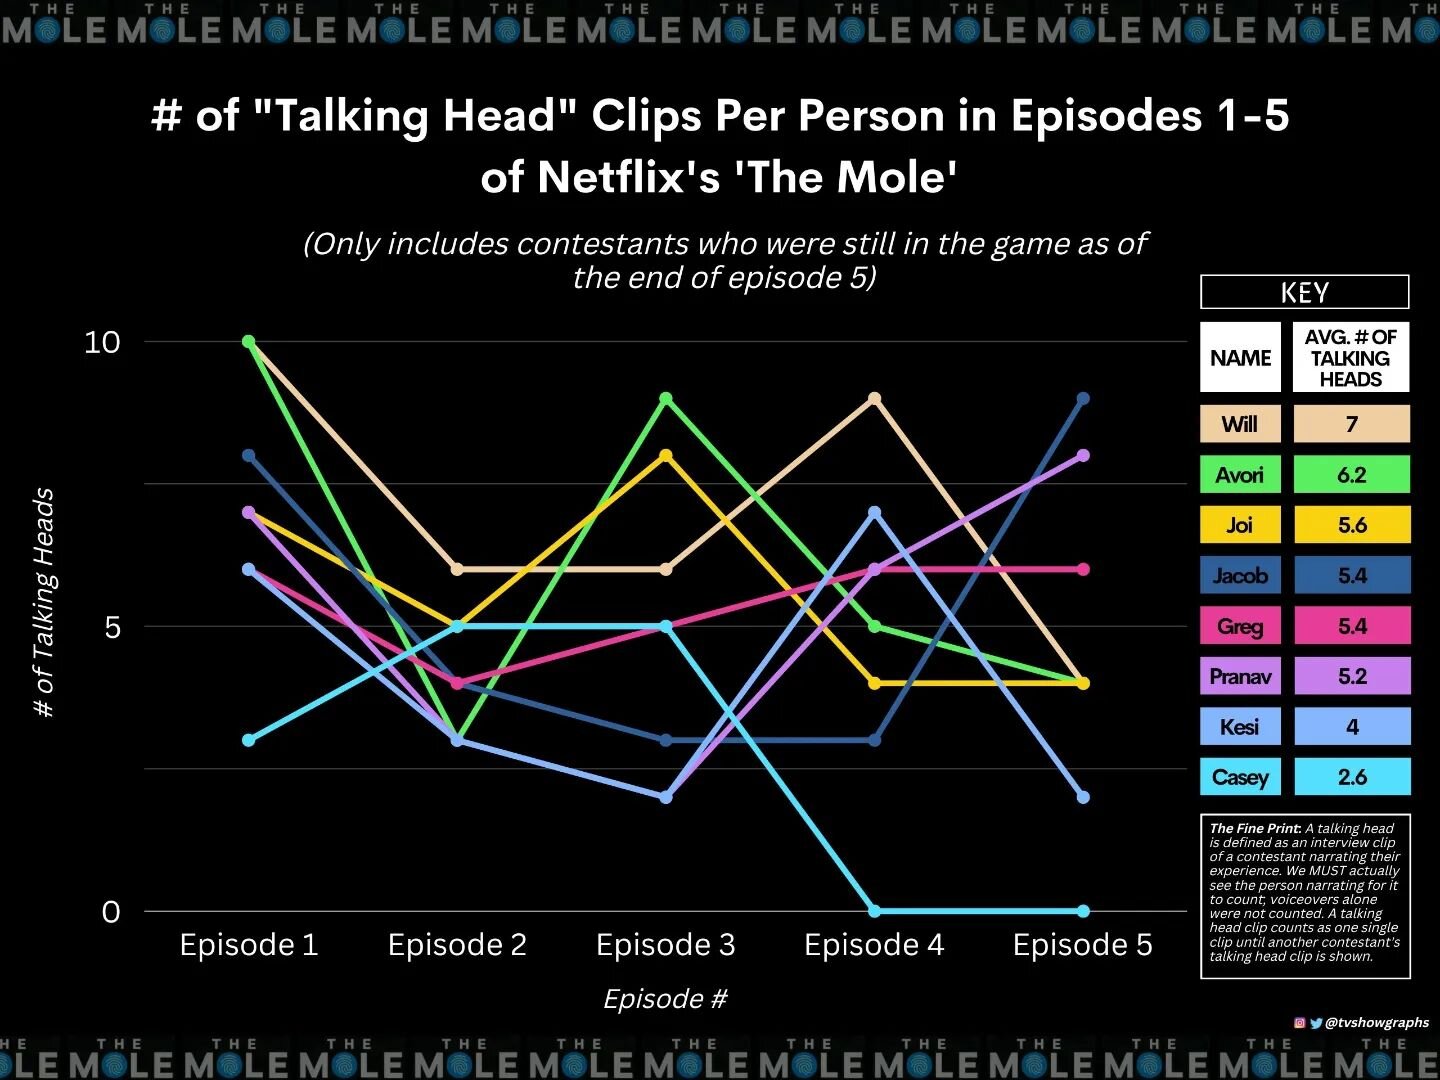 Netflix's new version of #TheMole is such a blast - if you haven't yet watched it, it's a fun reality TV diversion that has a cool detective element to it as well! There's tons of data that can be looked at with this show, but I wanted to take a look